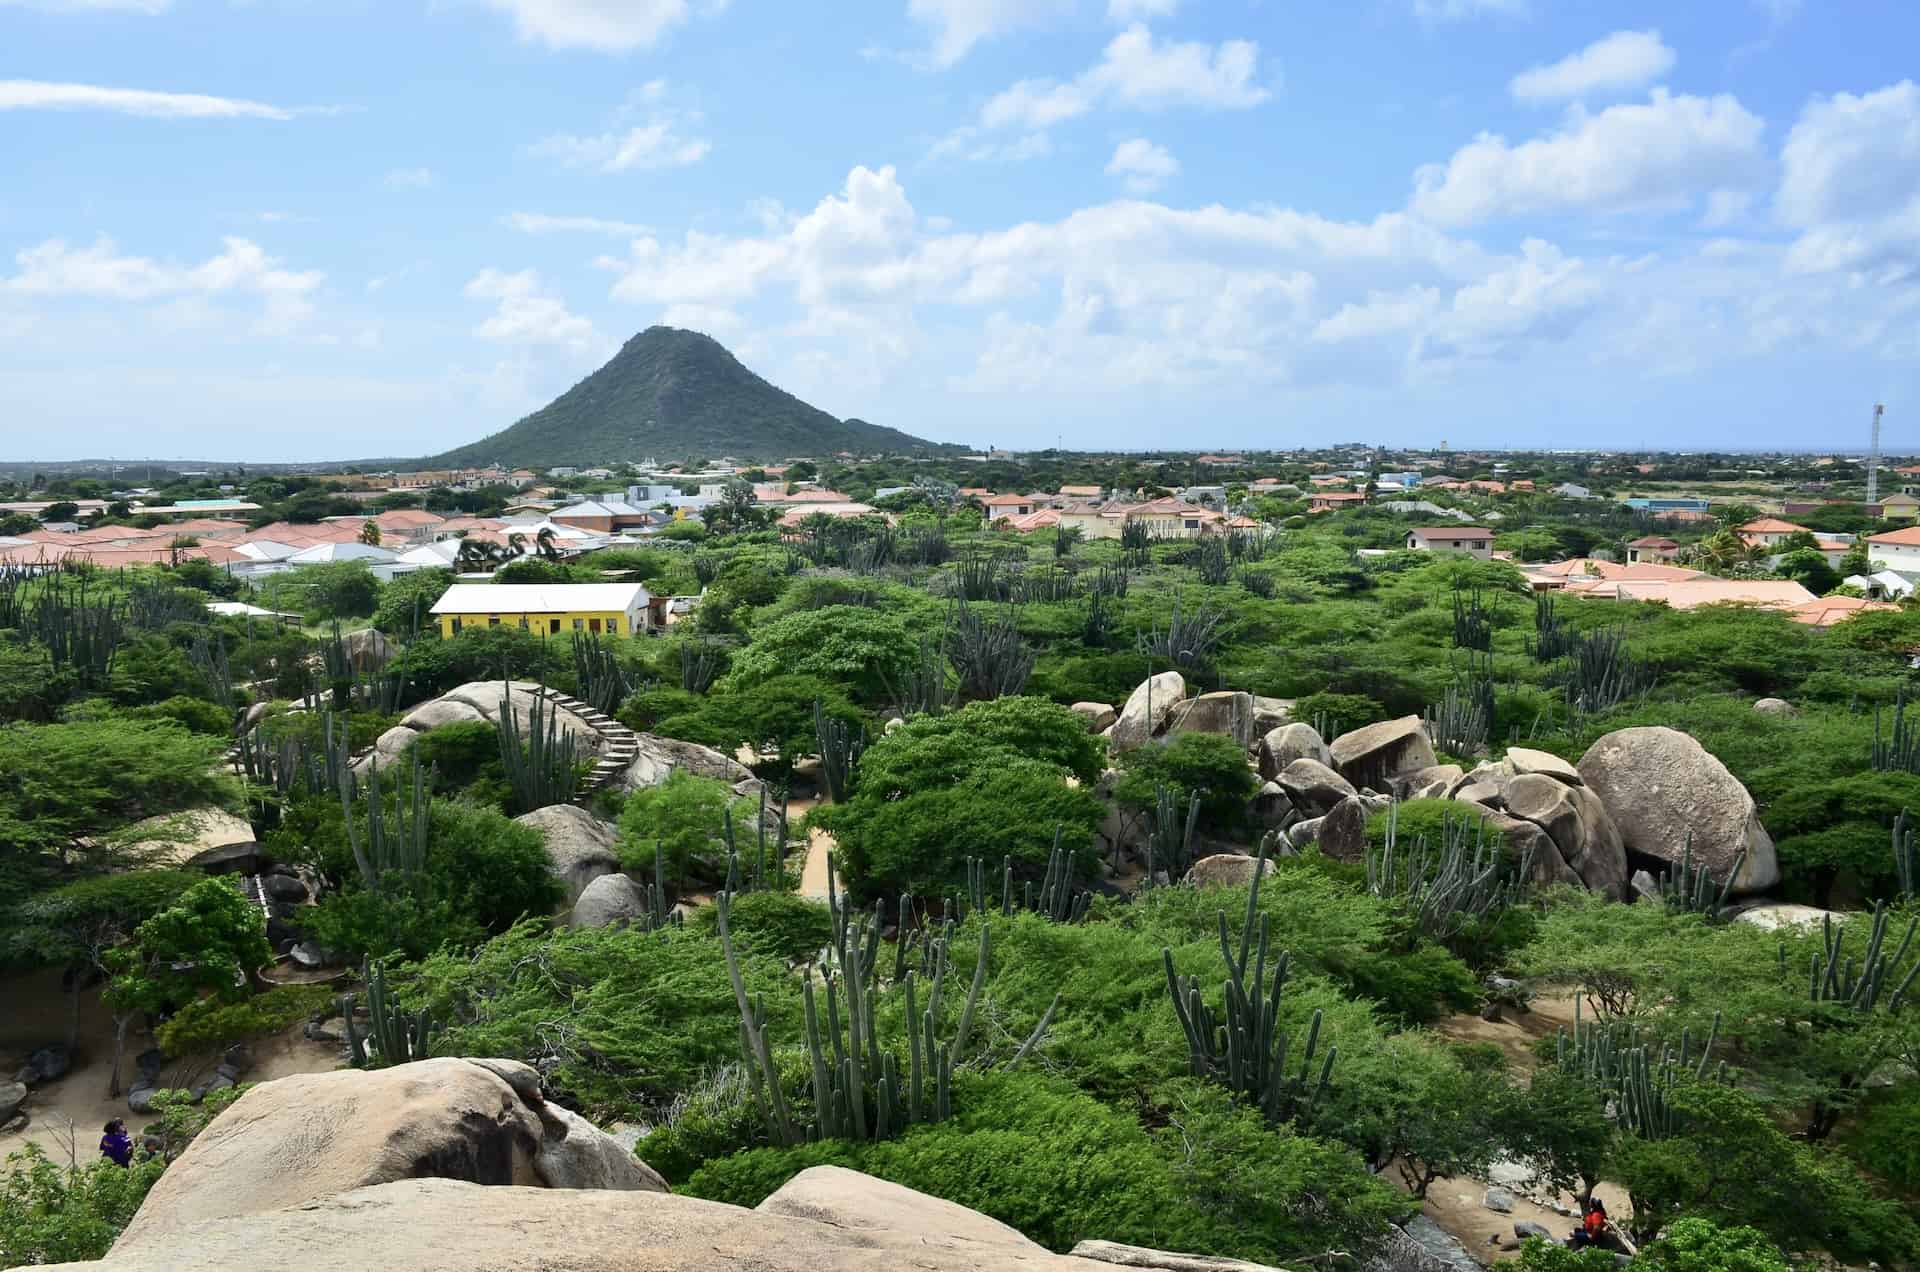 Looking south towards Hooiberg from the top of the largest rock at the Casibari Rock Formations in Paradera, Aruba